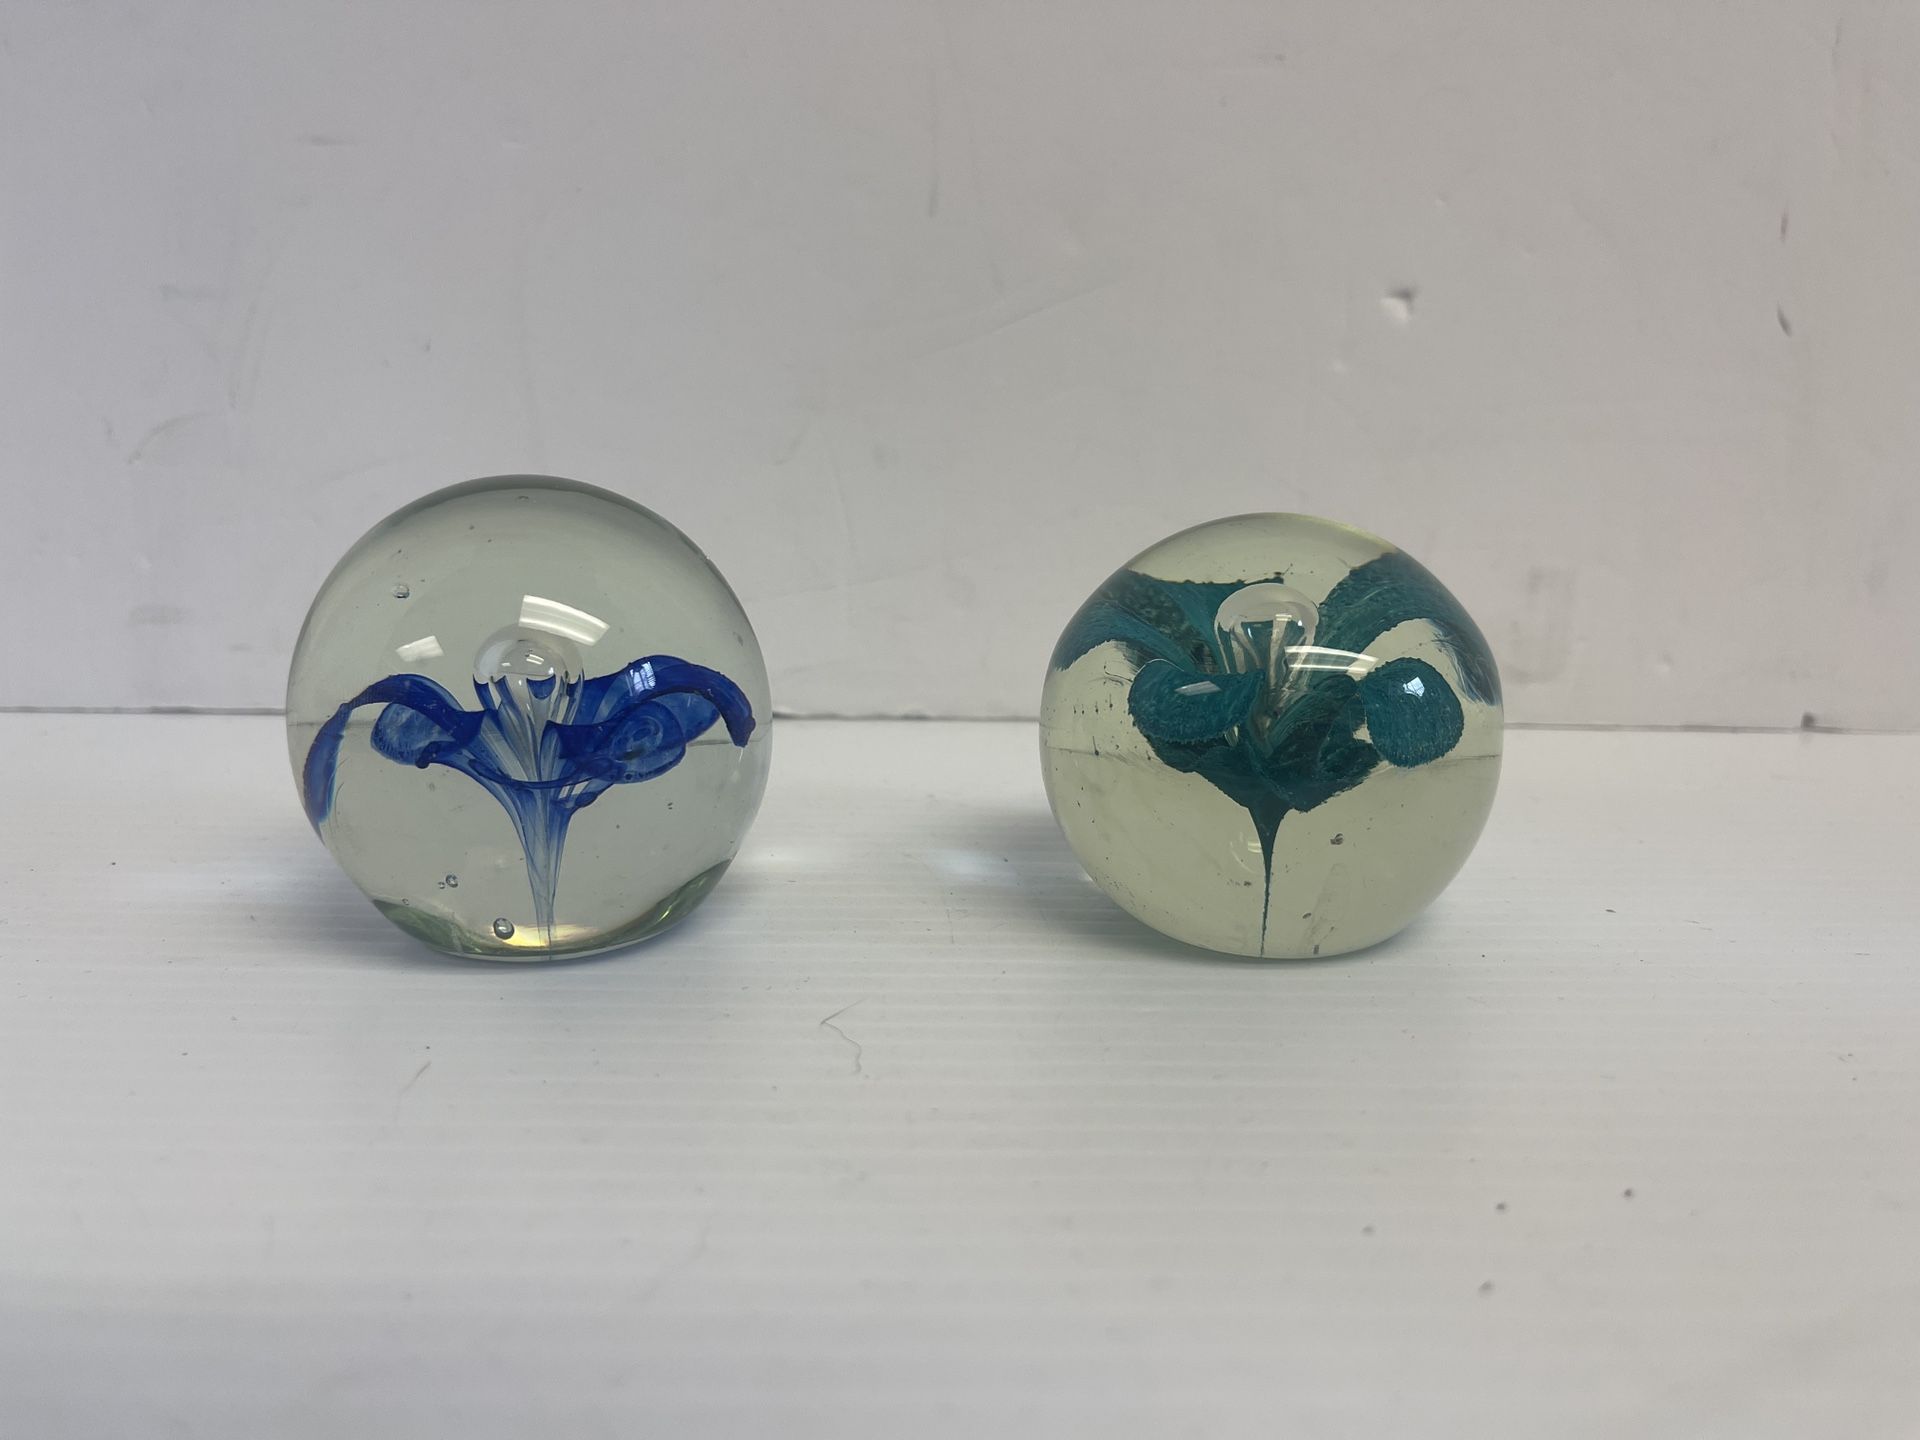 2 round blown glass flower paper weights 1 blue 1 green flower - D1010  This beautiful set of two round paper weights features delicate floral pattern